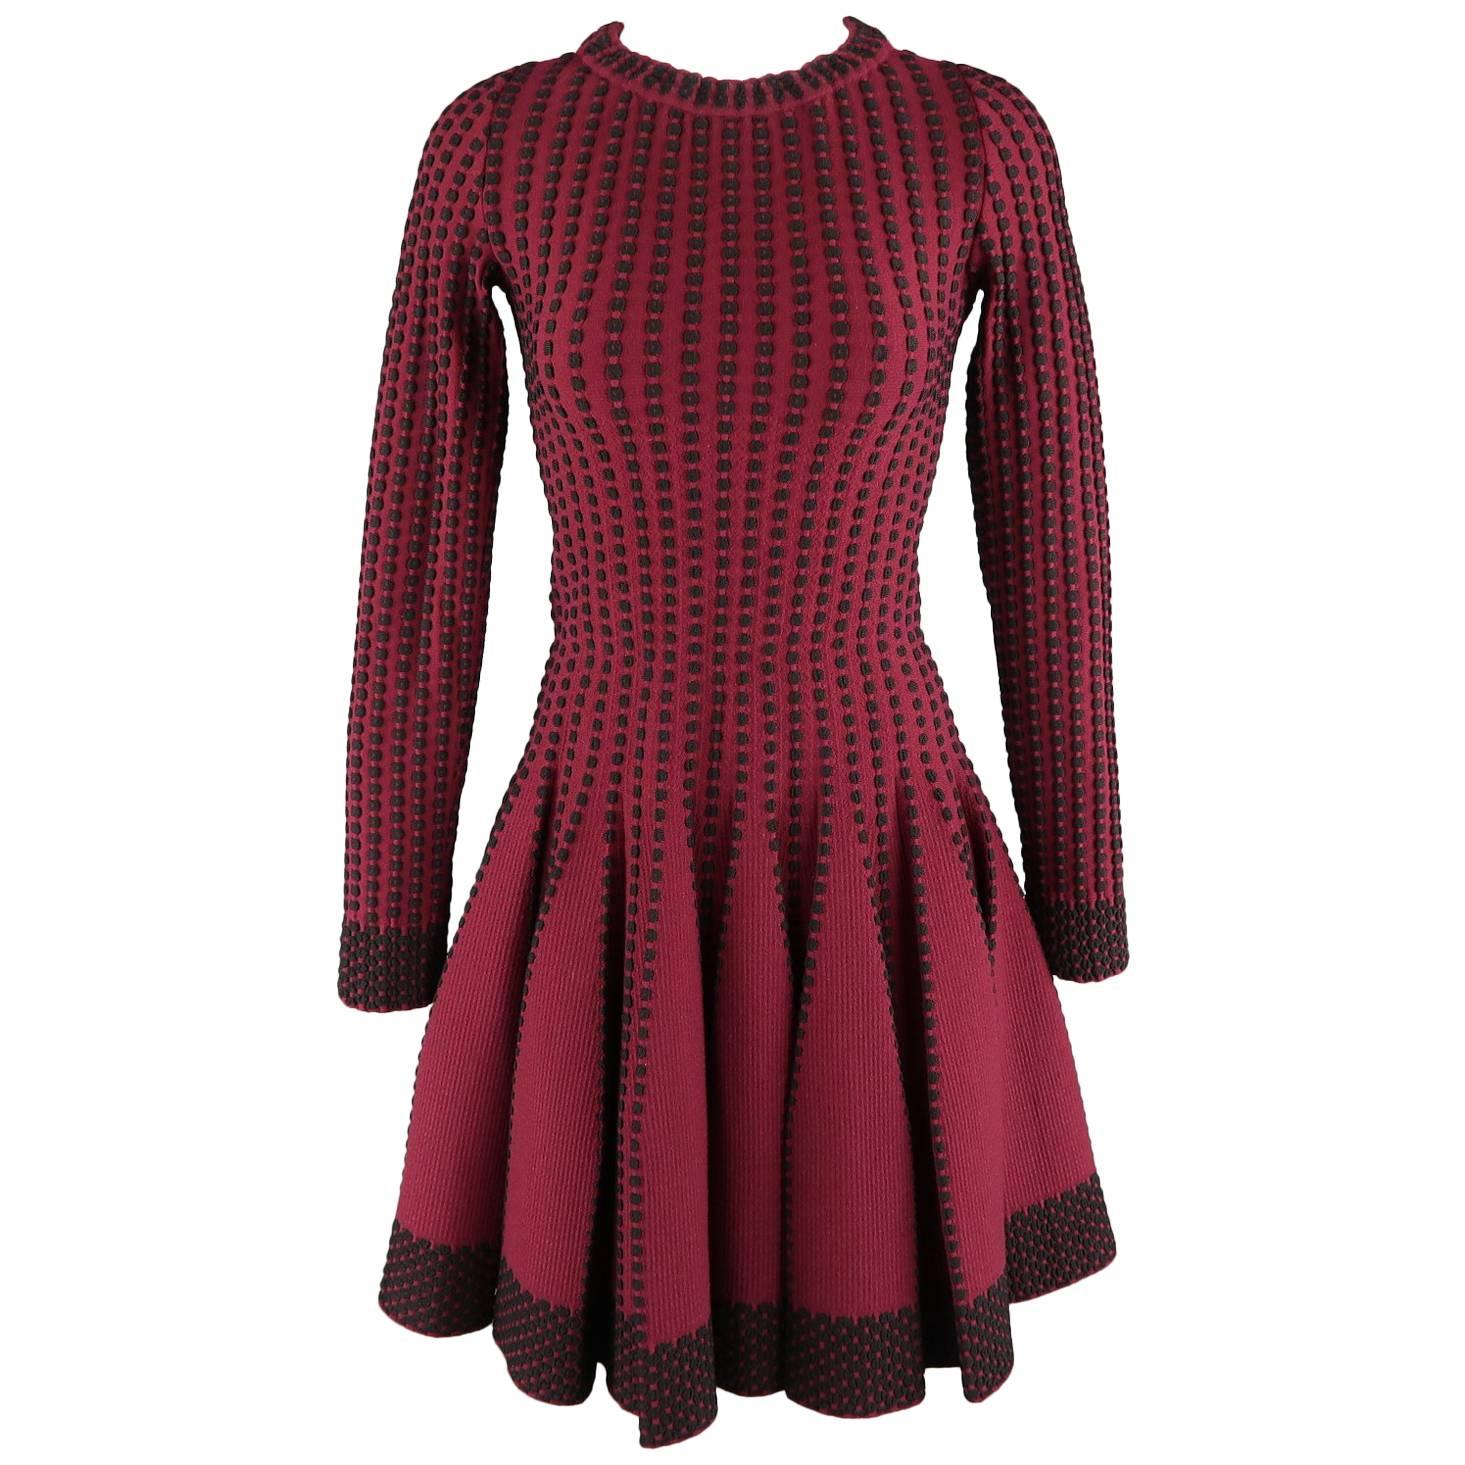 Alaia Burgundy and Black Stretch Wool Fruit Flair Long Sleeve Dress, Size 10